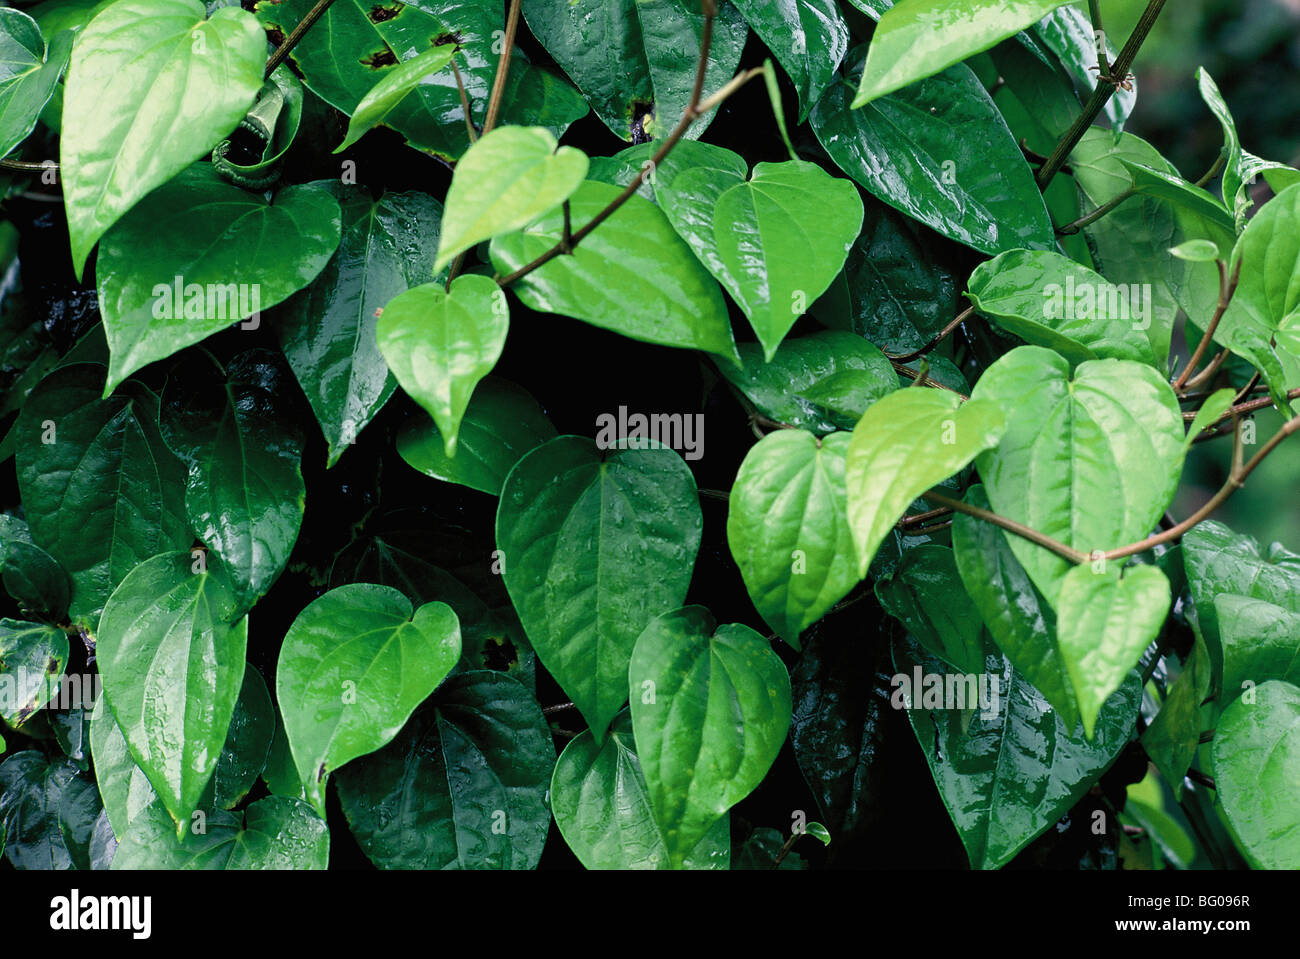 Betel vine leaves (Piper betle), the Piperaceae family, valued both as a mild stimulant and for its medicinal properties, India Stock Photo